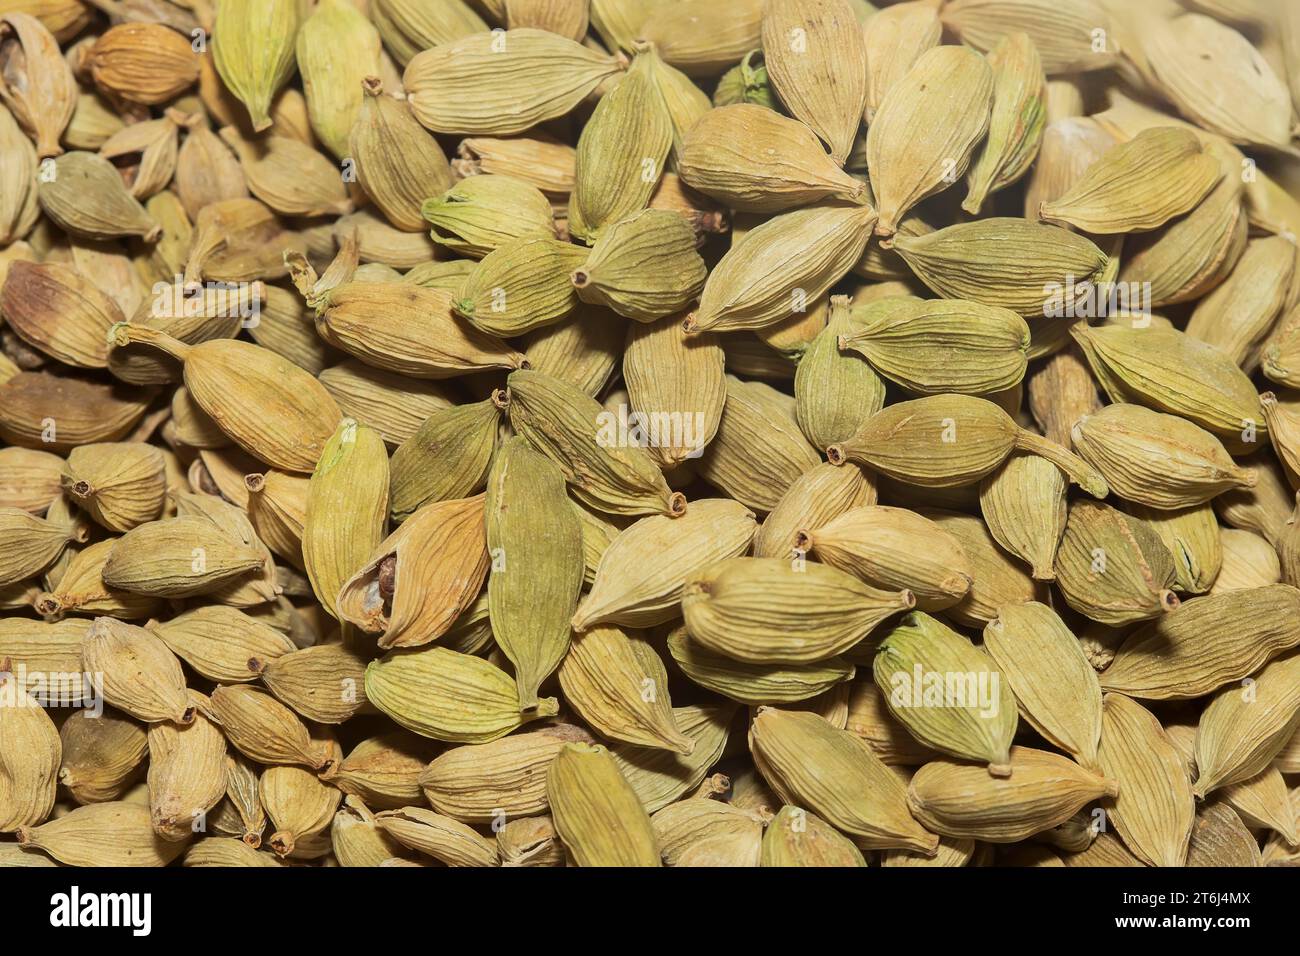 Large group of green cardamom seeds Stock Photo